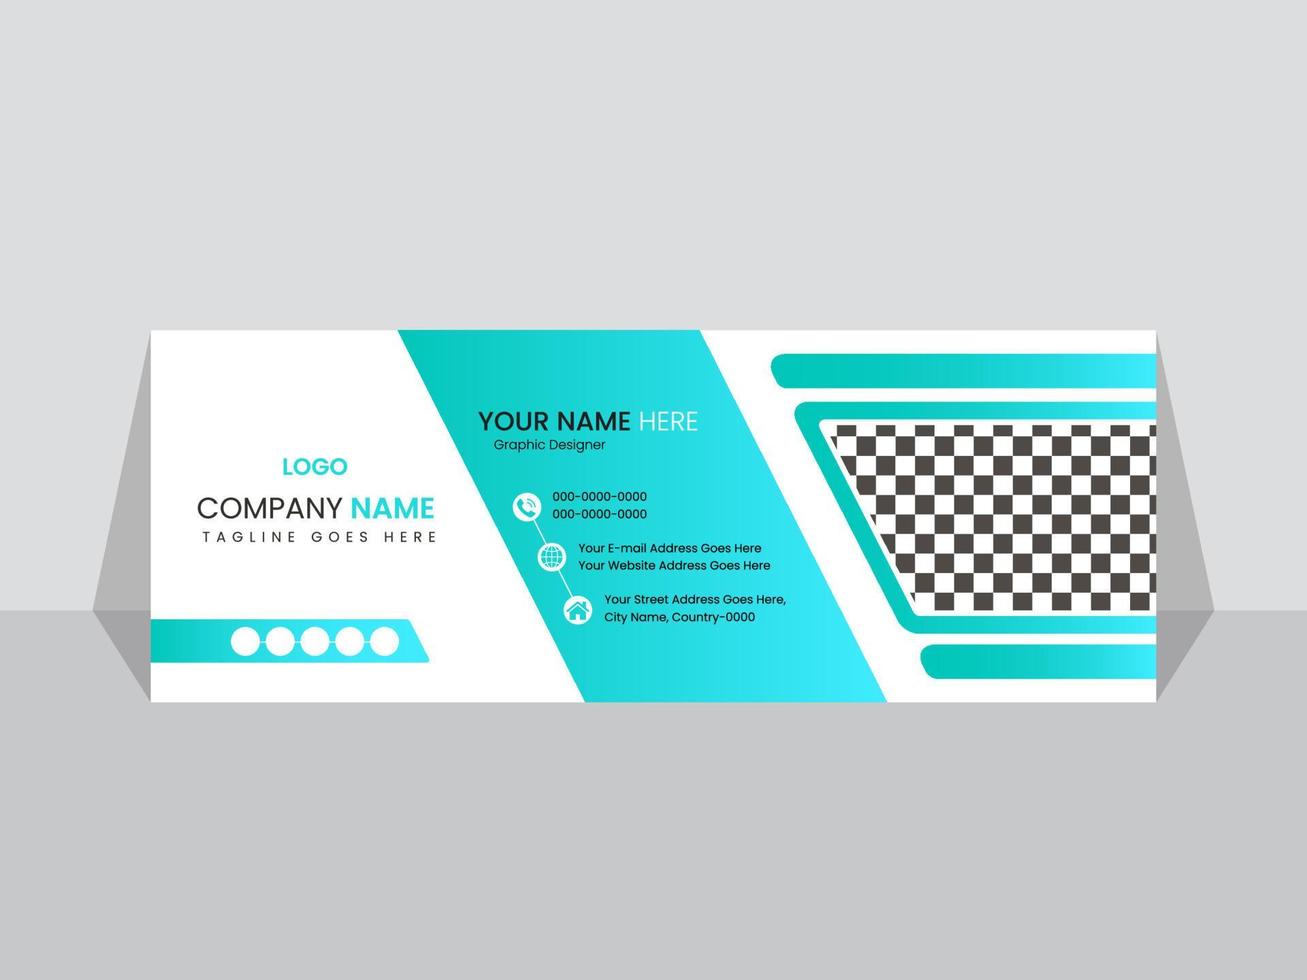 Email signature, email footer template or web banner vector